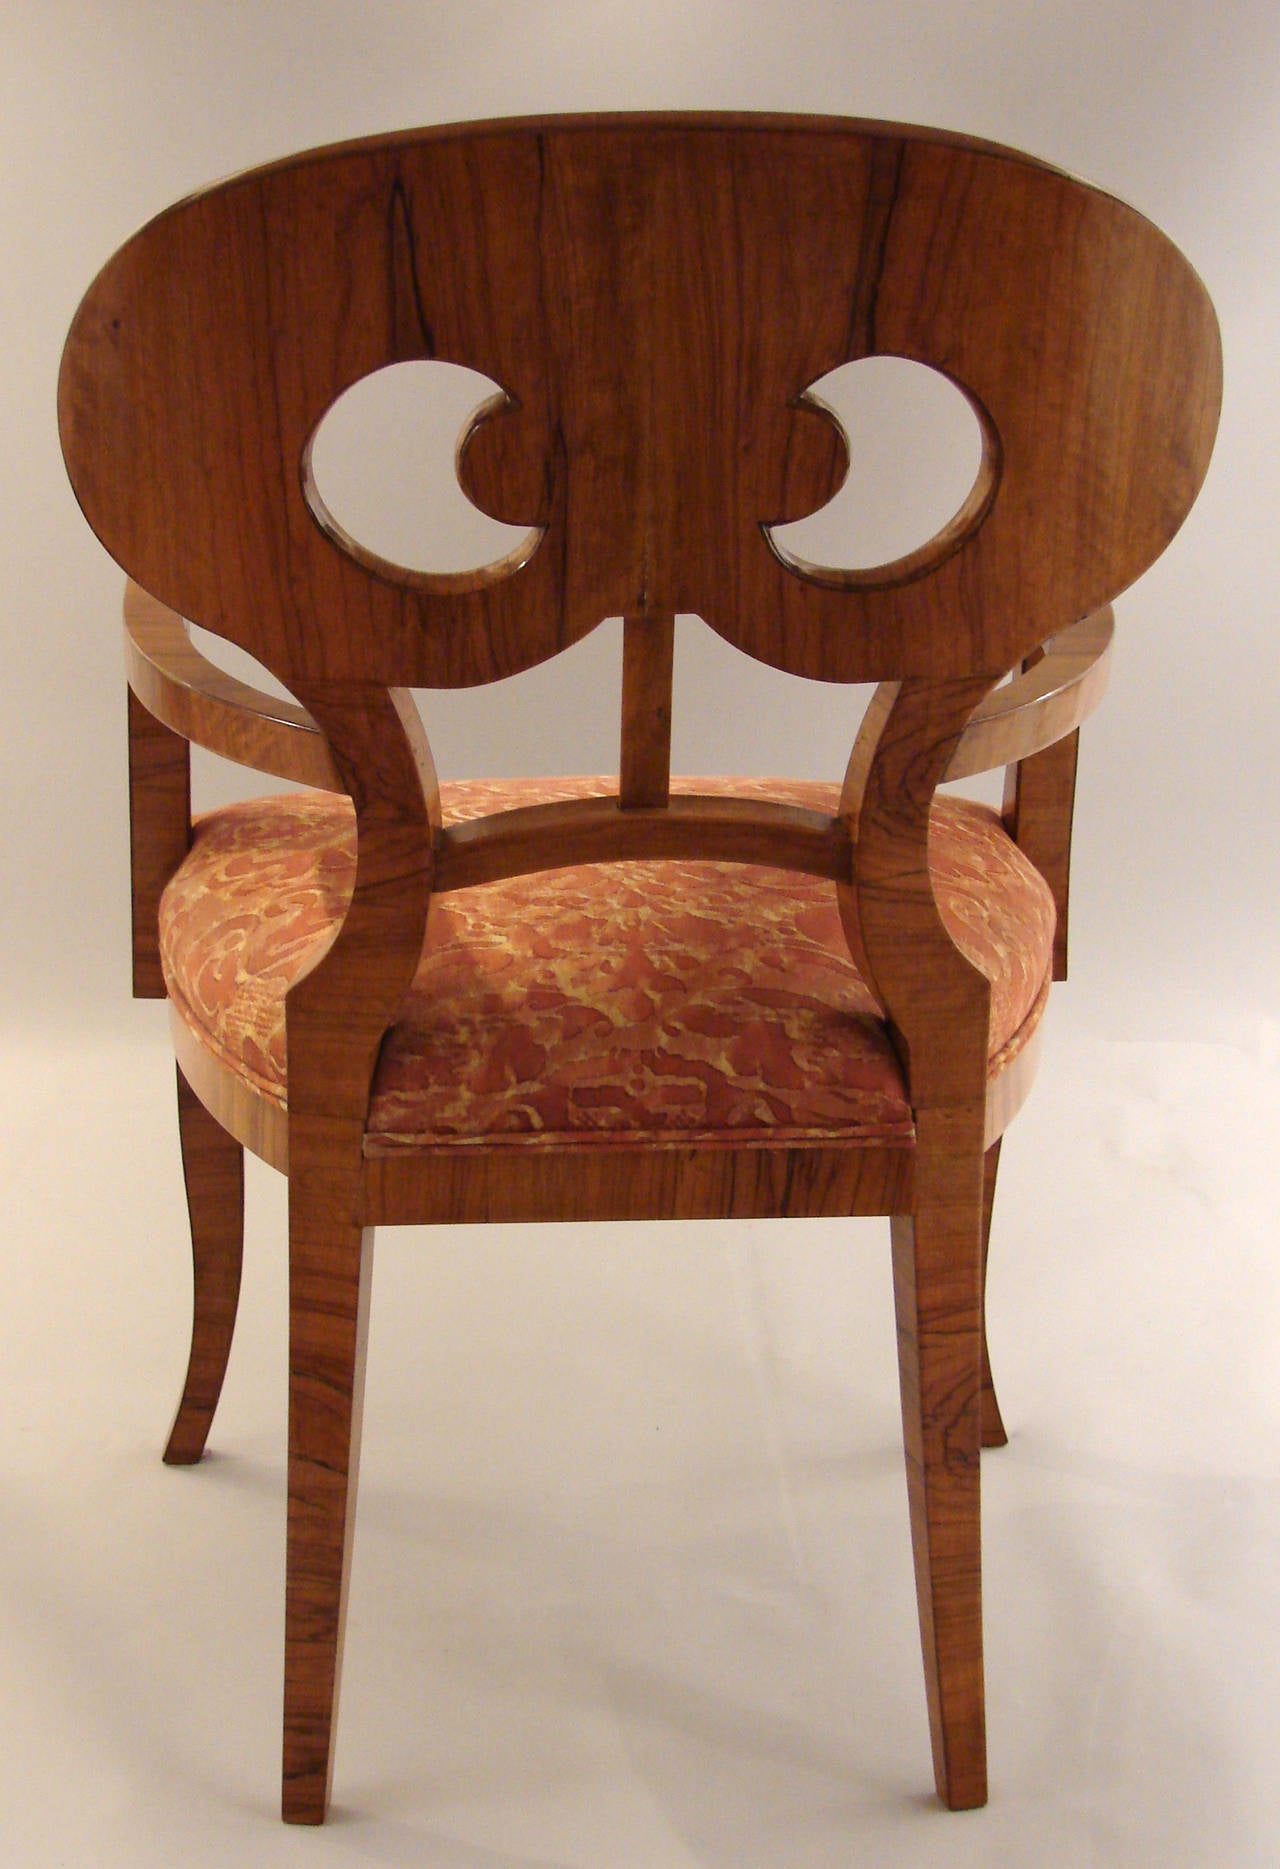 An attractive large-scale Biedermeier style walnut armchair with a pierced oval splat back and shaped square tapering legs, the seat covered in copper colored Fortuny style fabric, circa 1830-1850.